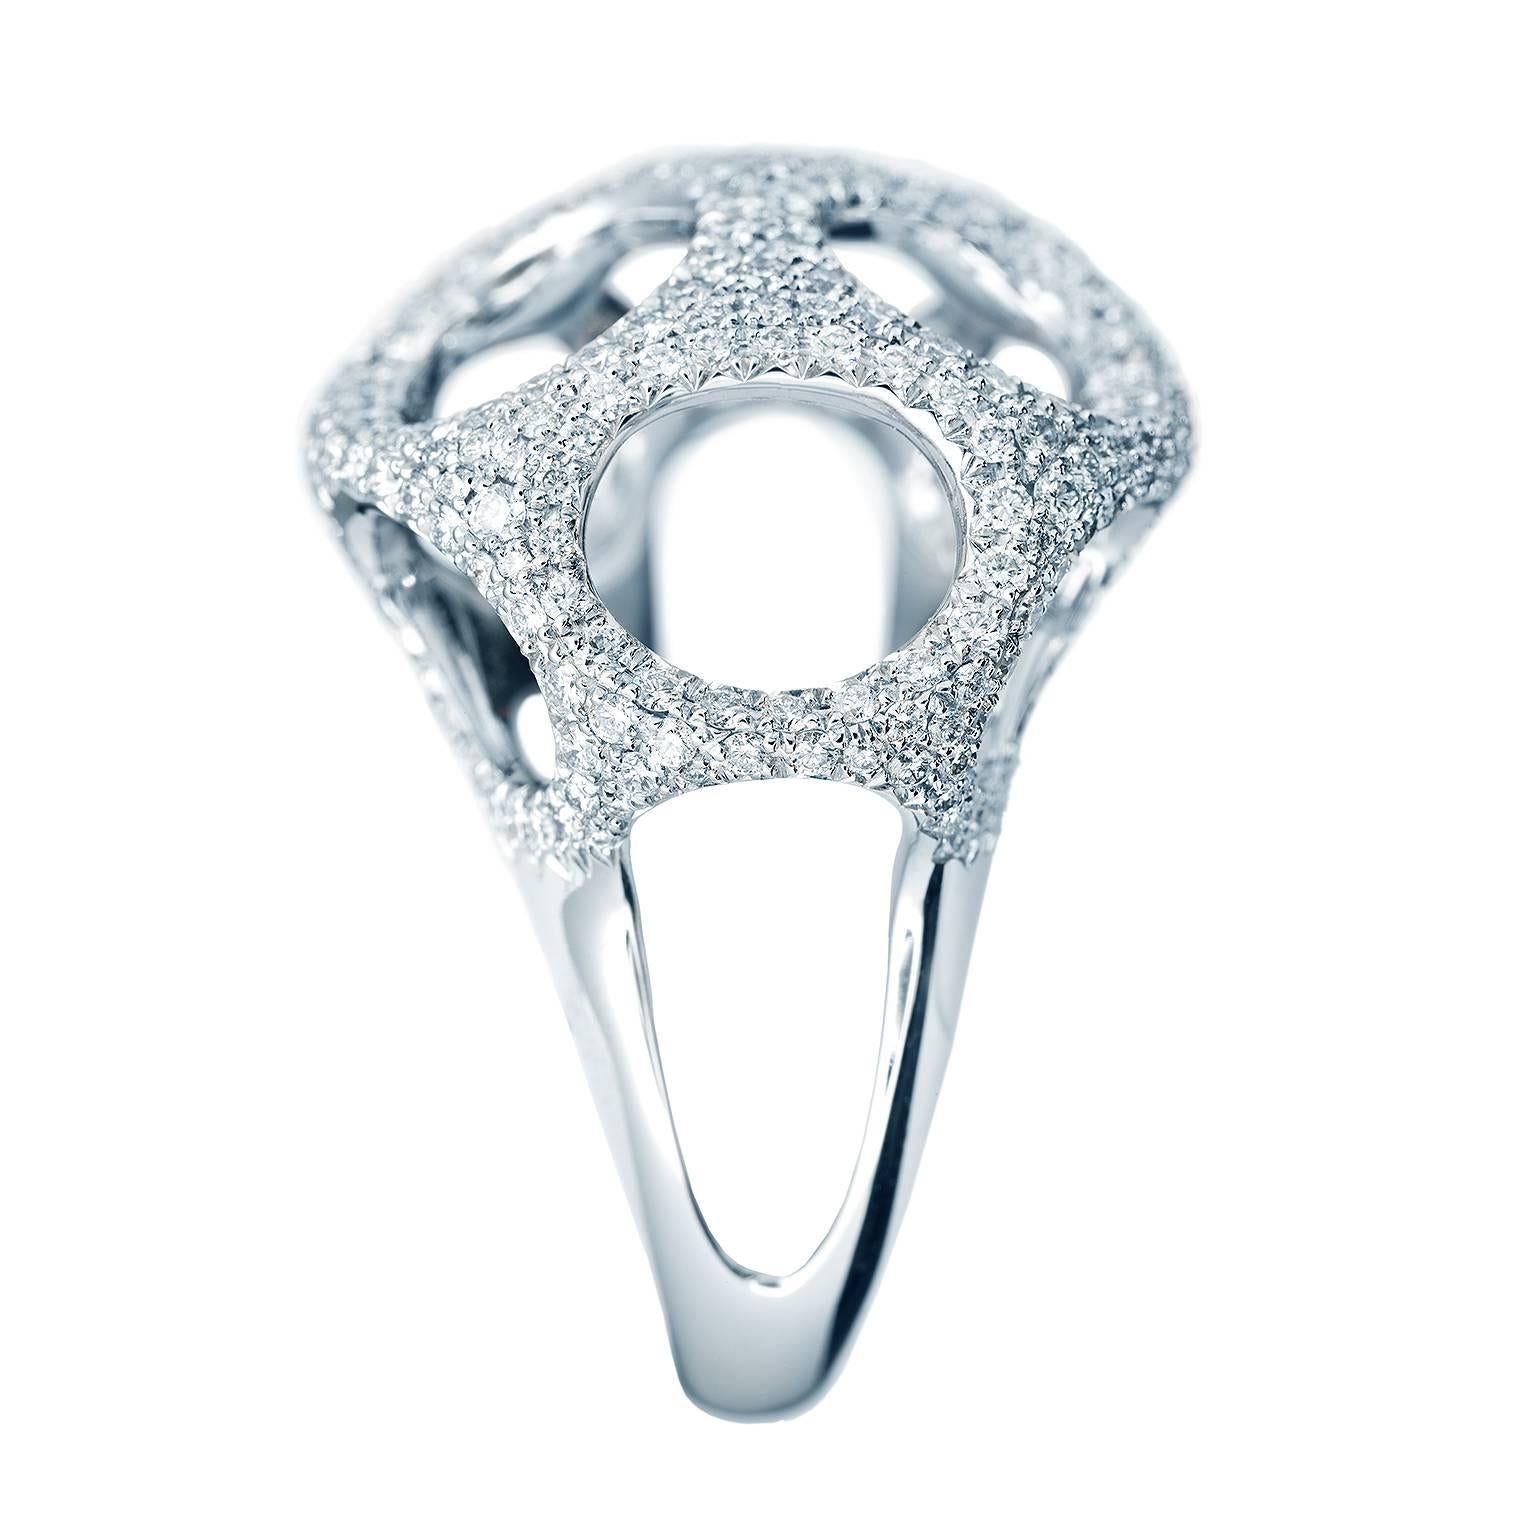 Towe Norlen Corail 2.15 Carat Contemporary Diamond Cocktail Ring For Sale 1